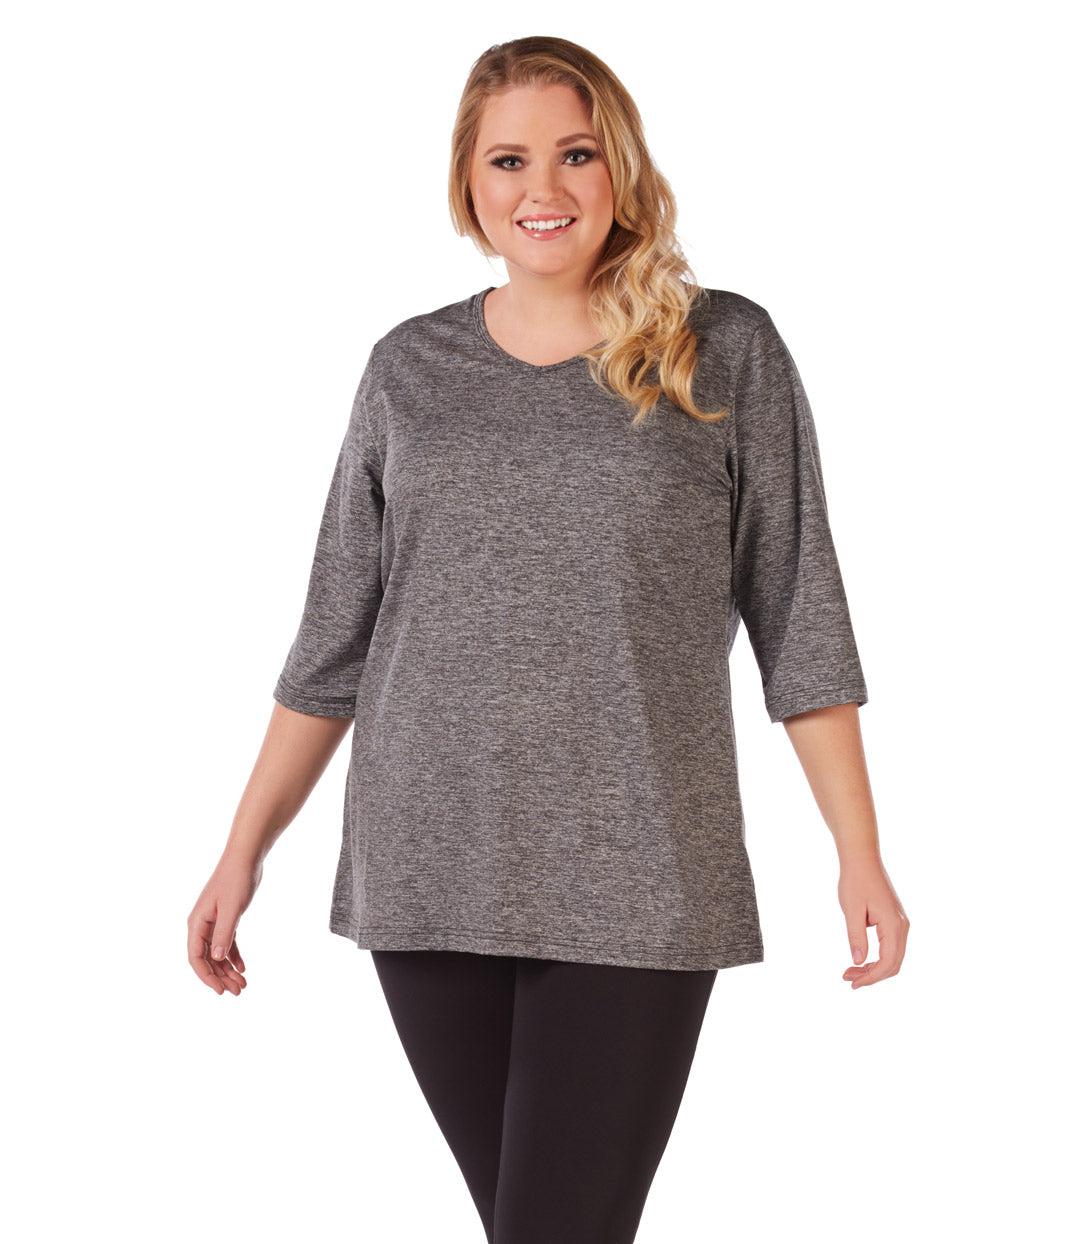 Plus size woman, facing front, wearing JunoActive plus size SoftWik V-Neck Tunic with ¾ sleeves in the color Heather Grey. She is wearing JunoActive Plus Size Leggings in the color Black.